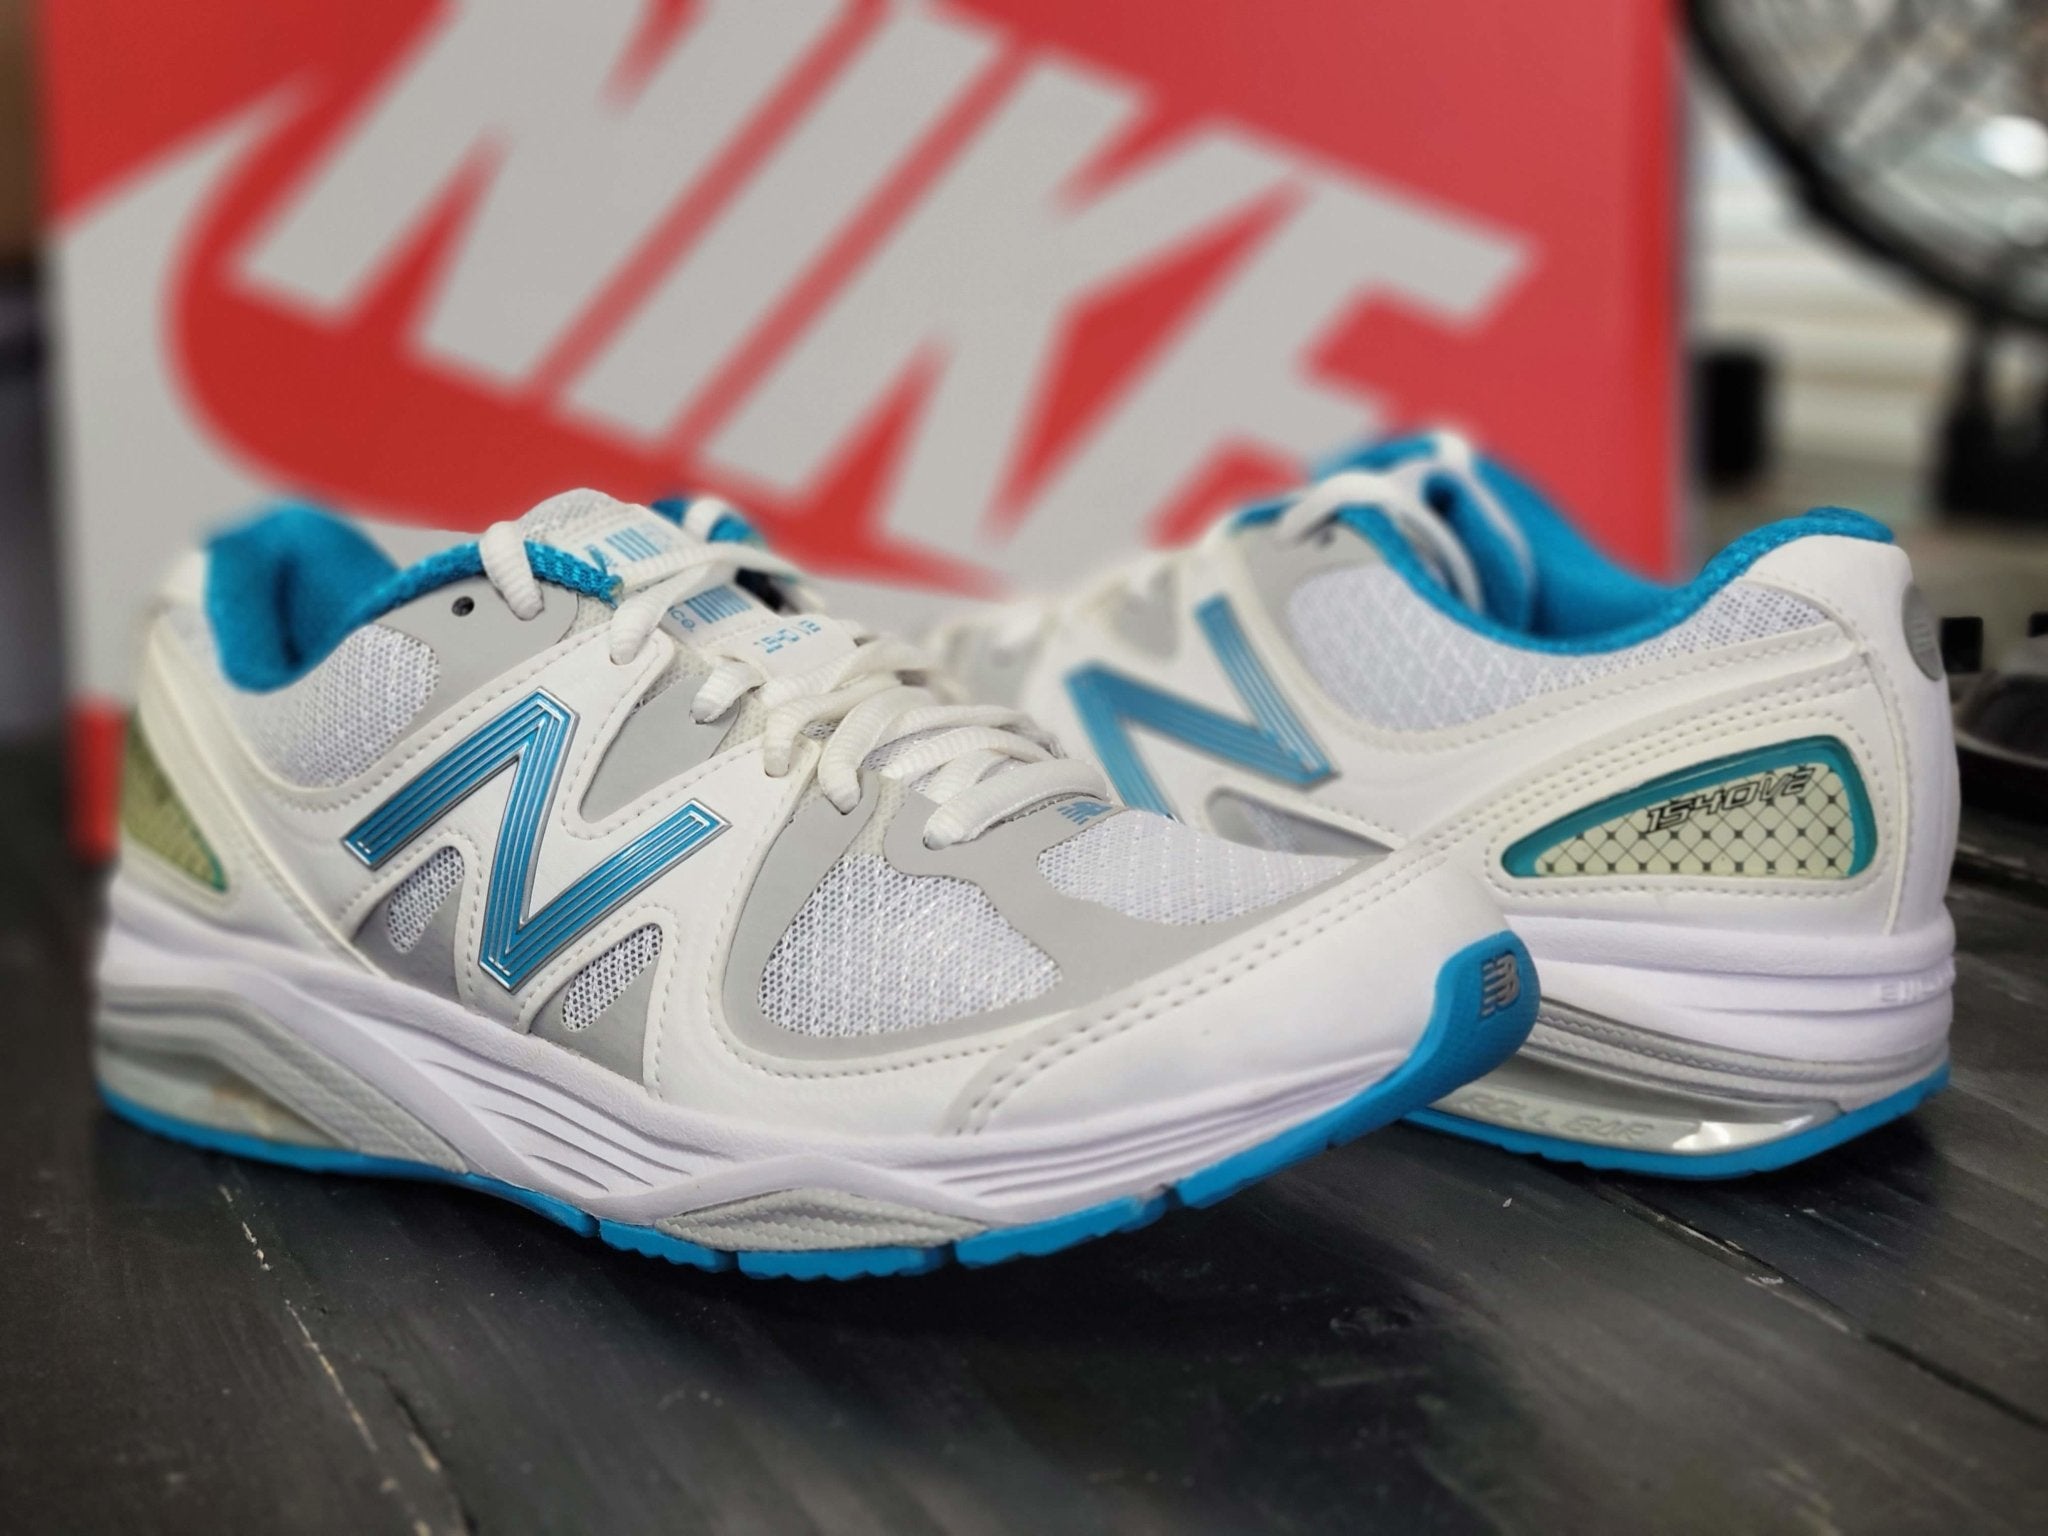 Impulso Tratar Mentalmente New Balance 1540v2 Made in USA White/Blue Running Shoes Women size 6 2A  Width - SoldSneaker